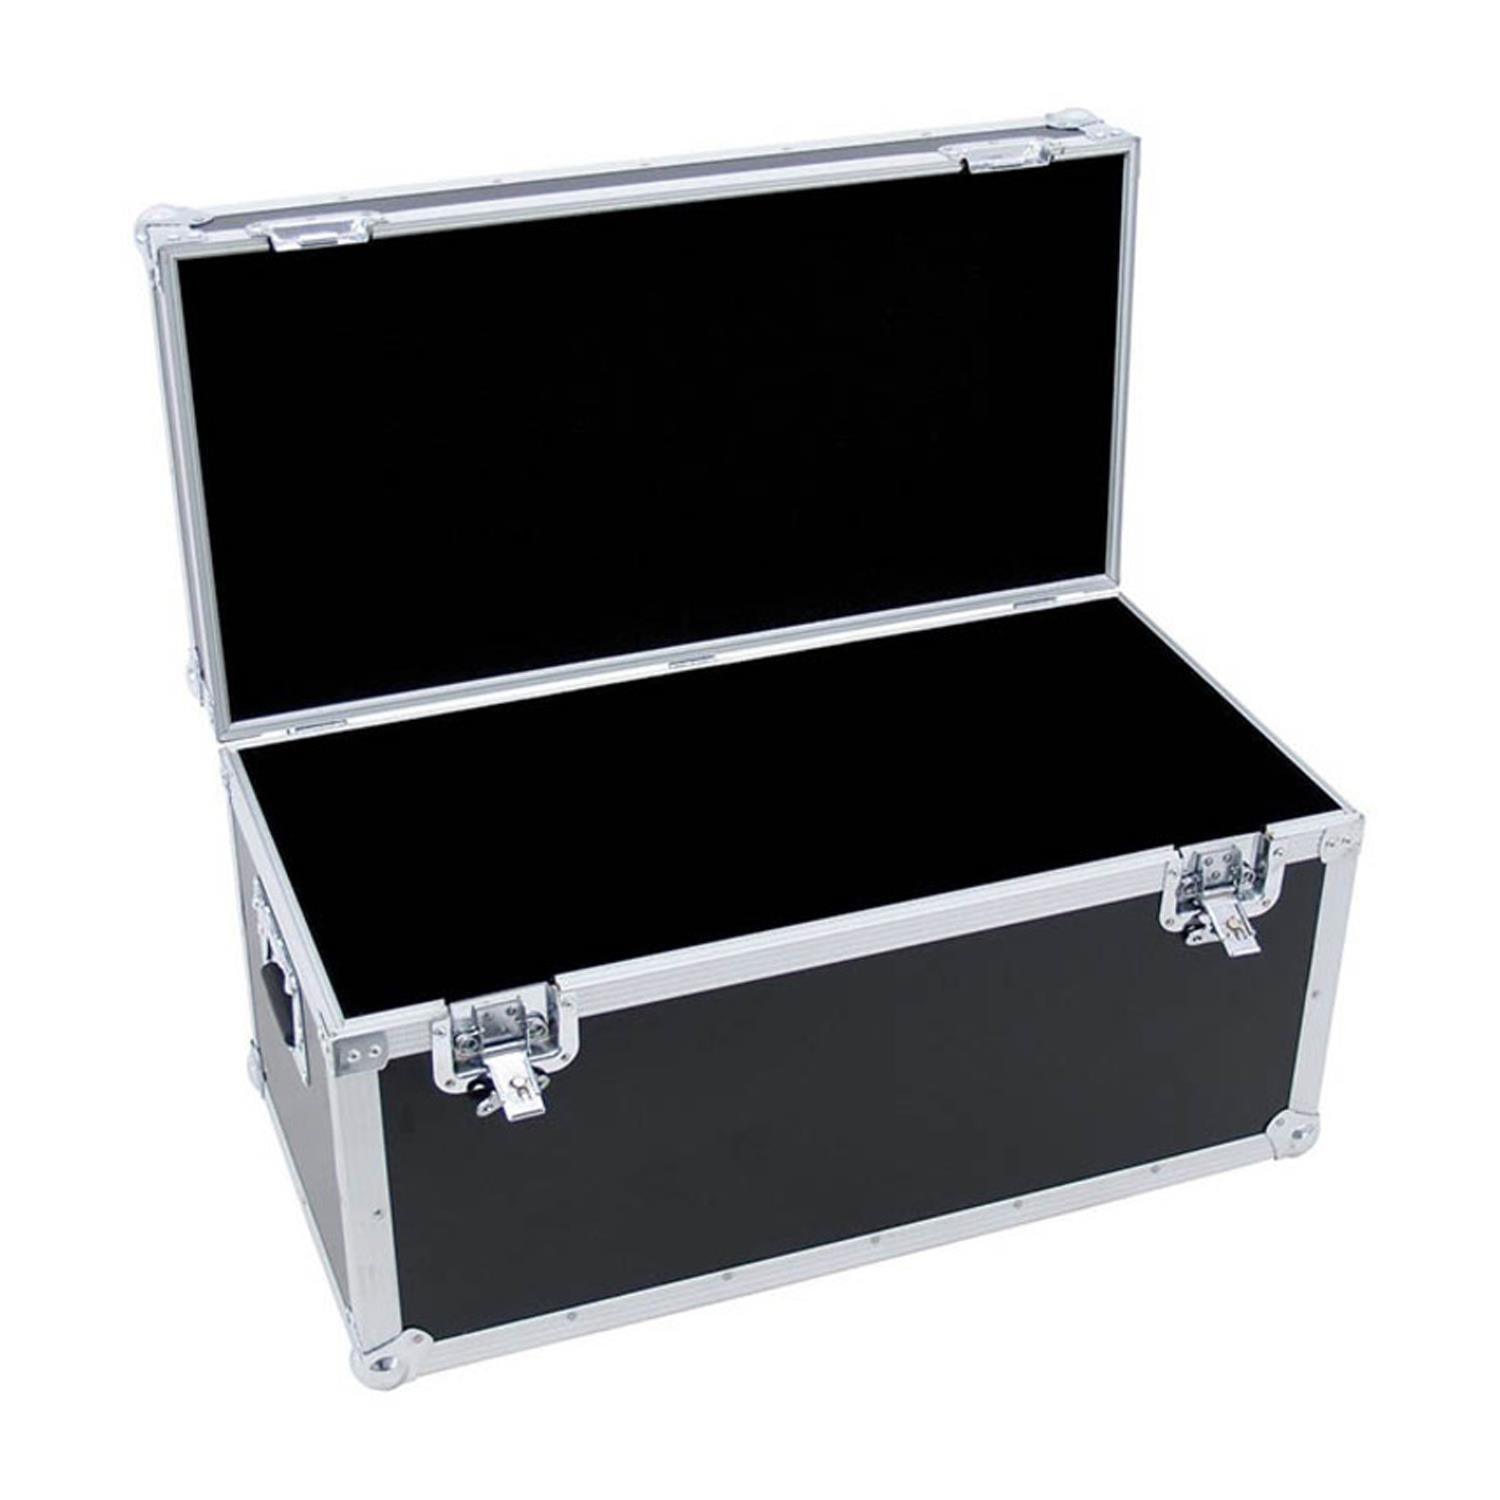 StageCore FC82 800x400x425mm Stacking Case - DY Pro Audio